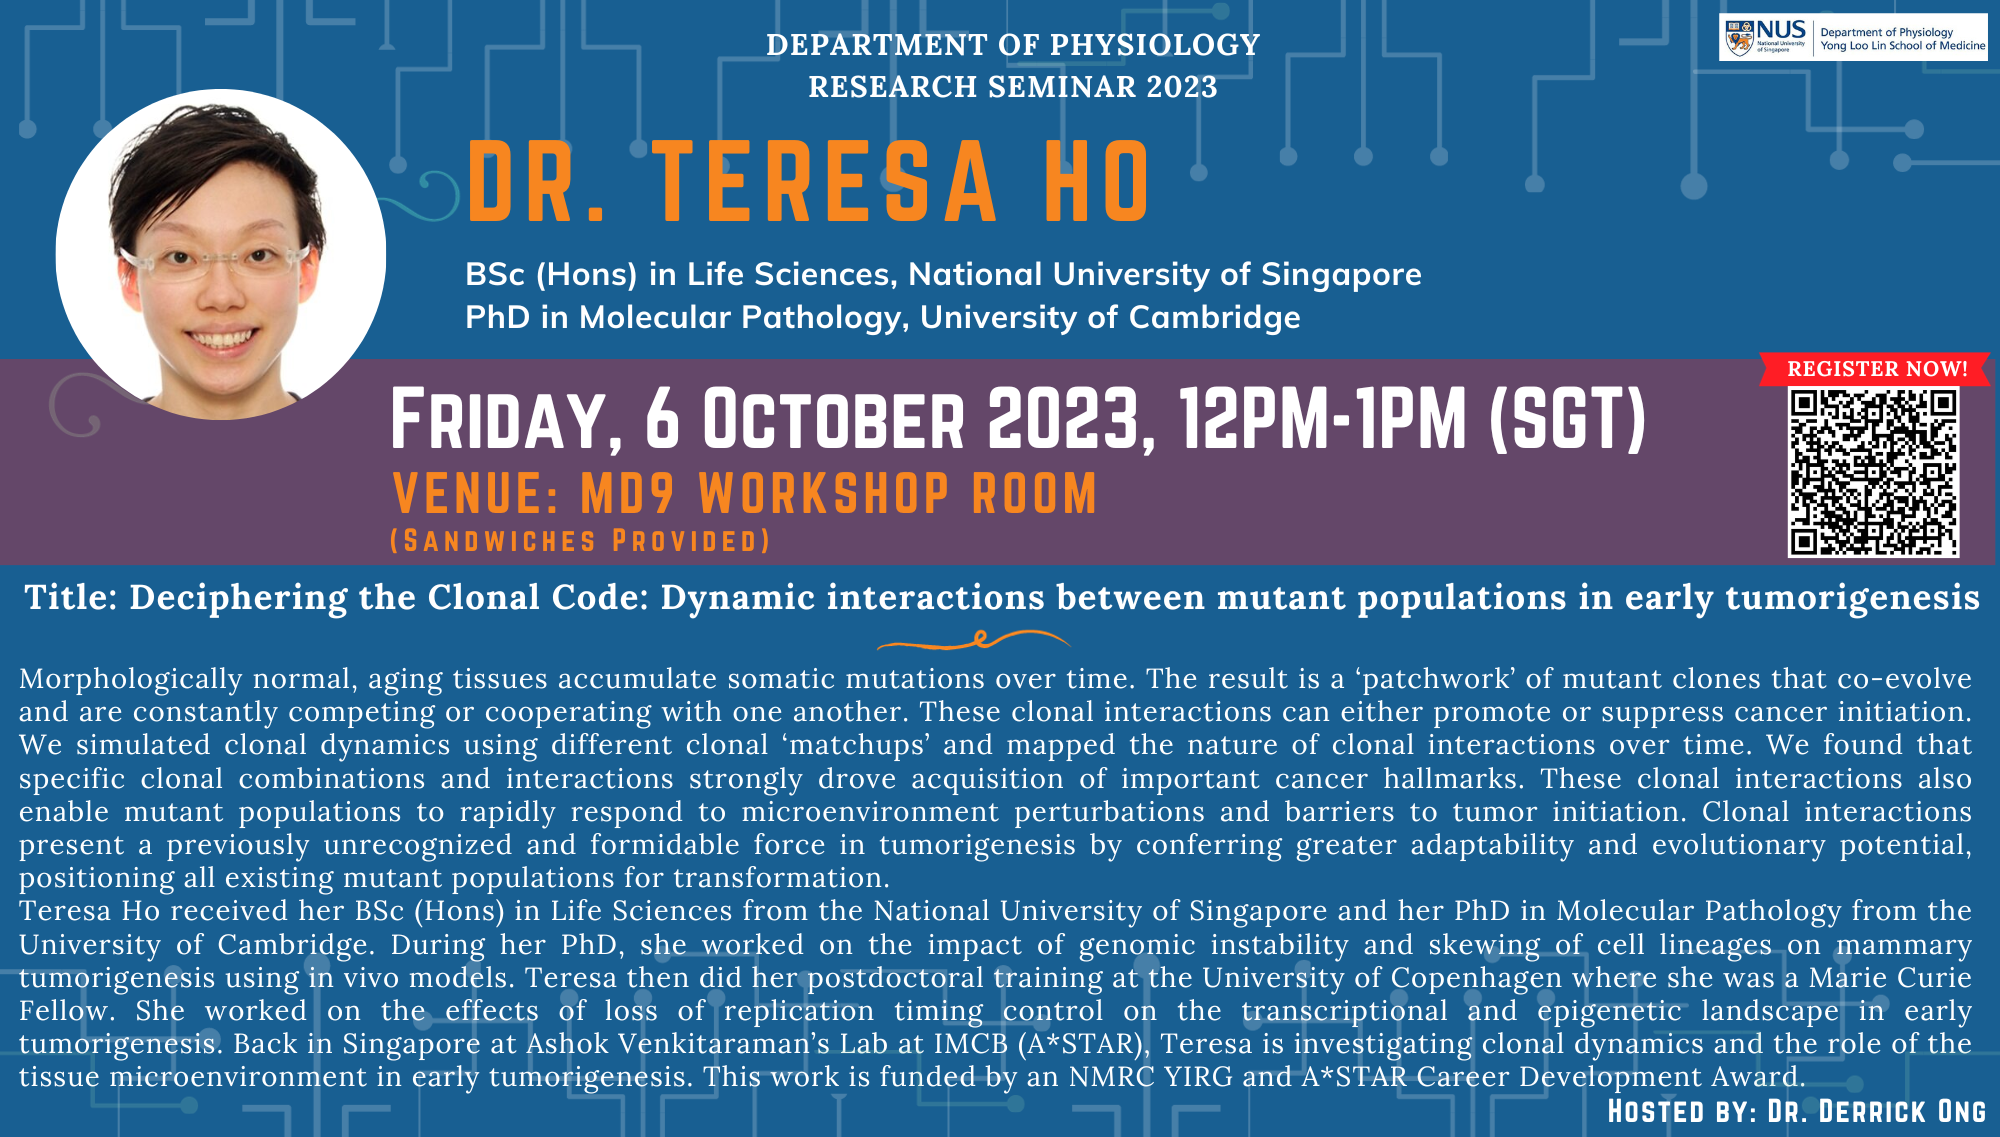 Physiology Research Seminar 6 October 2023